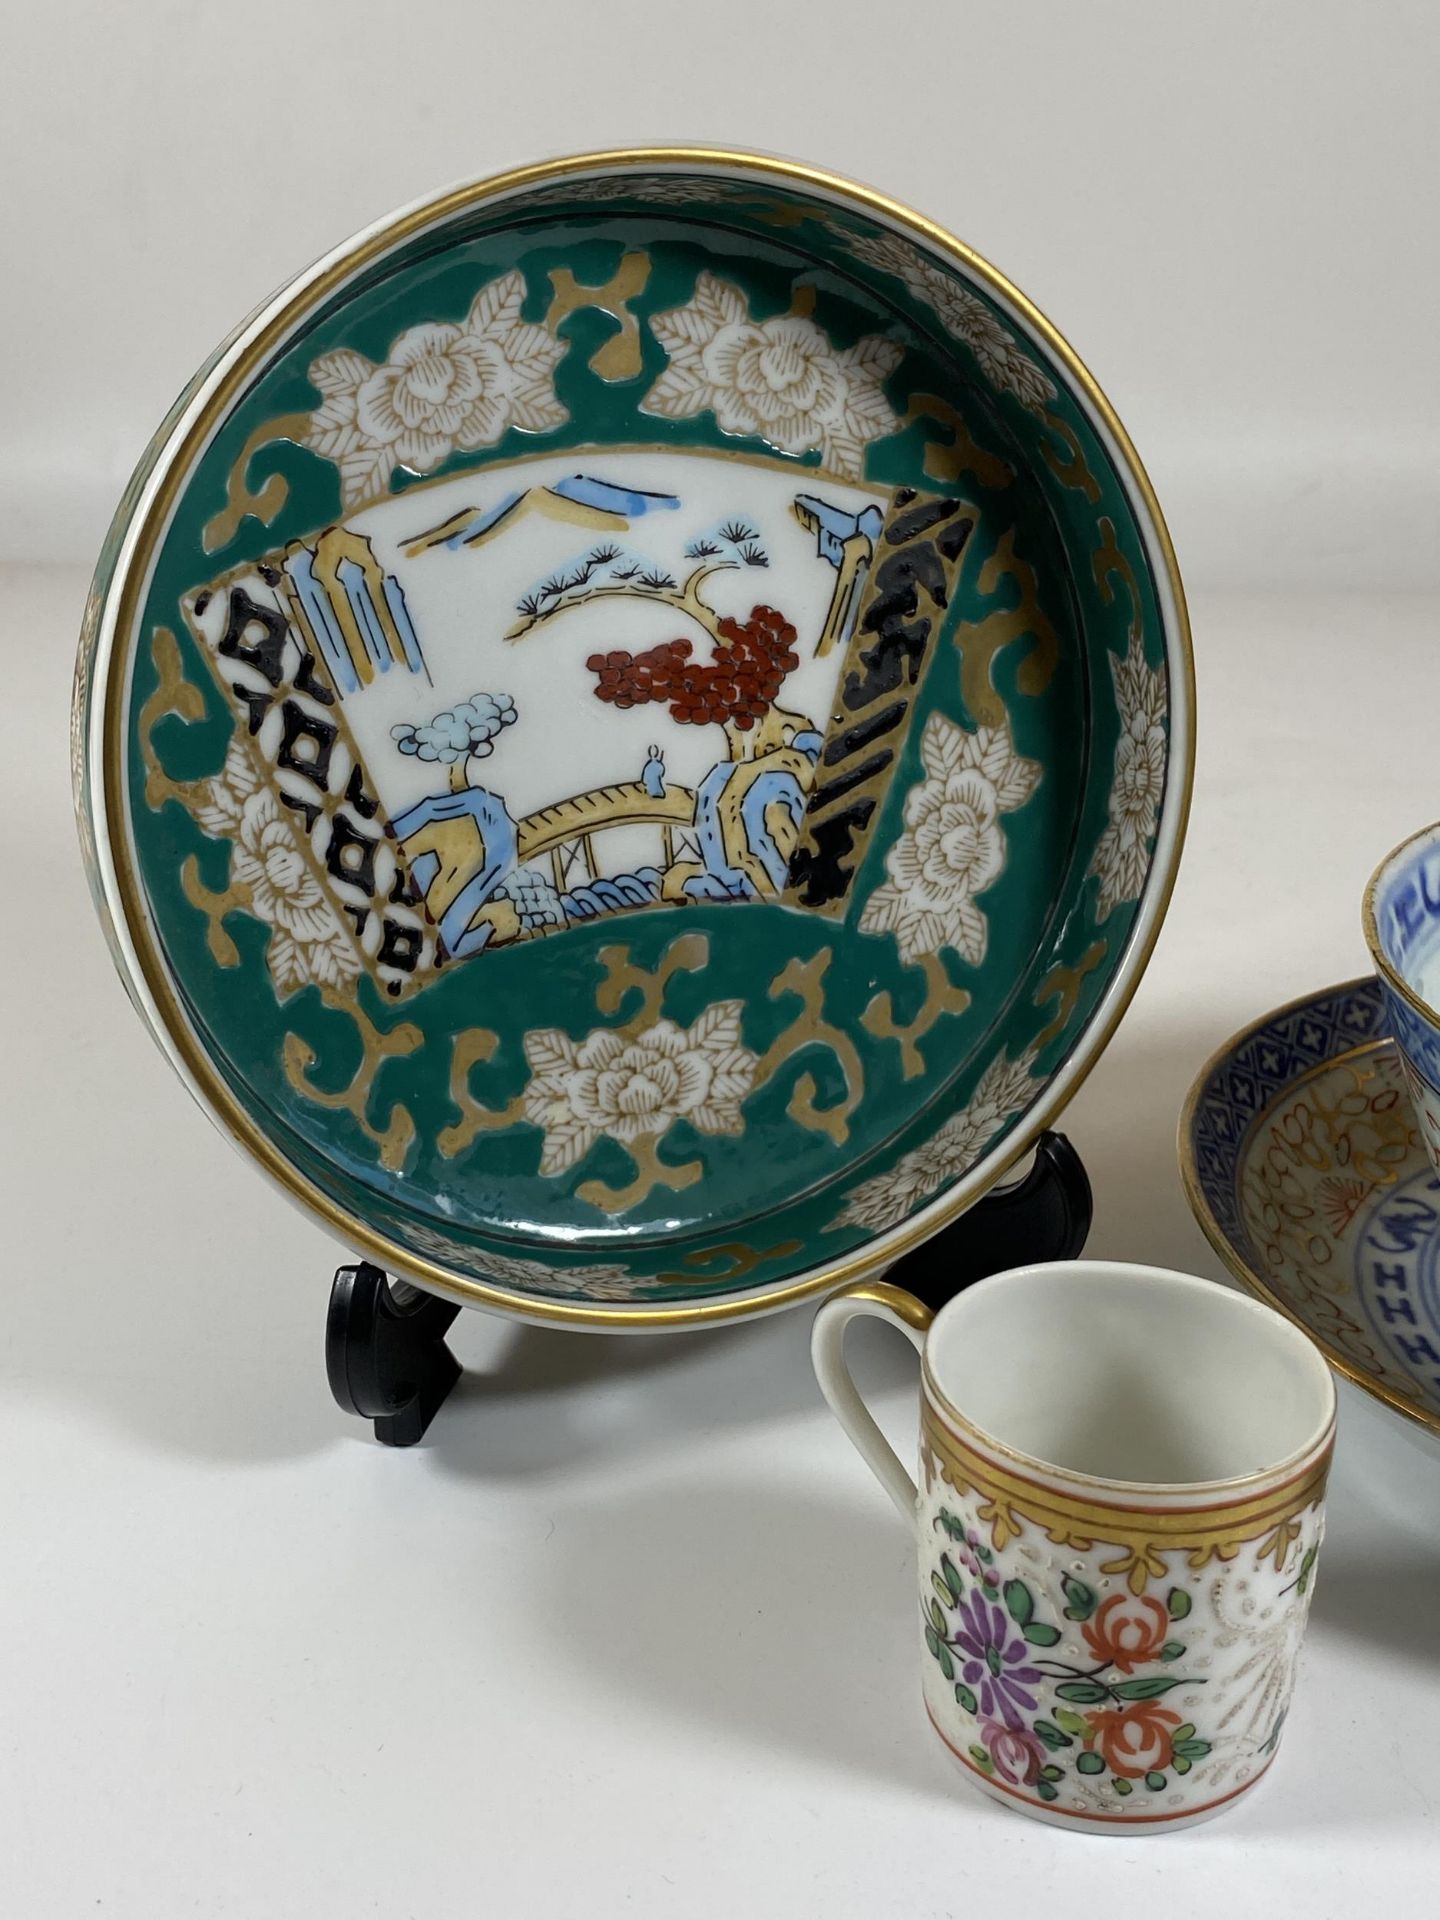 A GROUP OF ORIENTAL PORCELAIN, JAPANESE GOLD IMARI DISH, RICE DISH SET WITH DRAGON DESIGN AND - Image 2 of 5